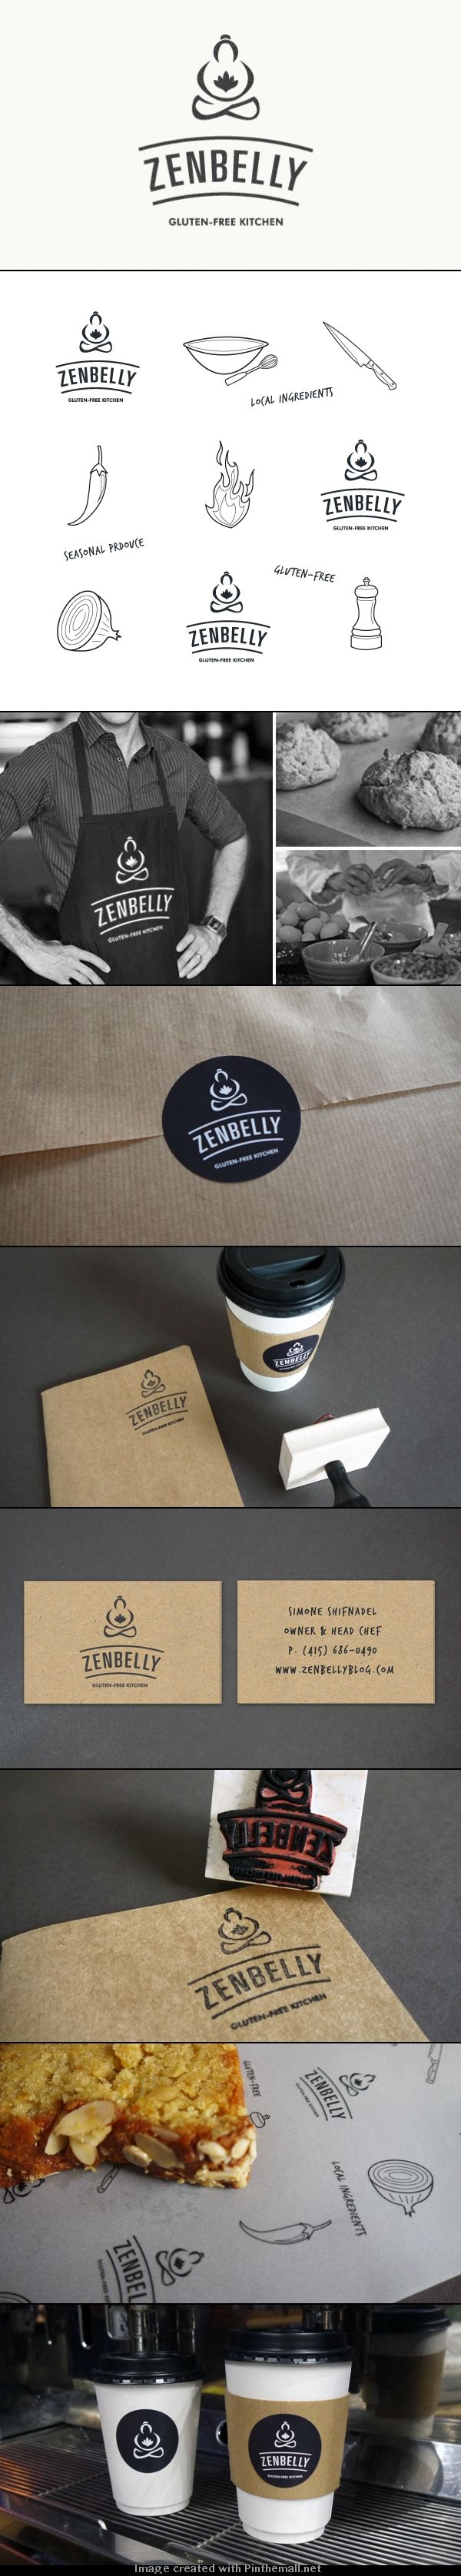 Peaceful and elegant branding and logo design for this coffee shop. We love the